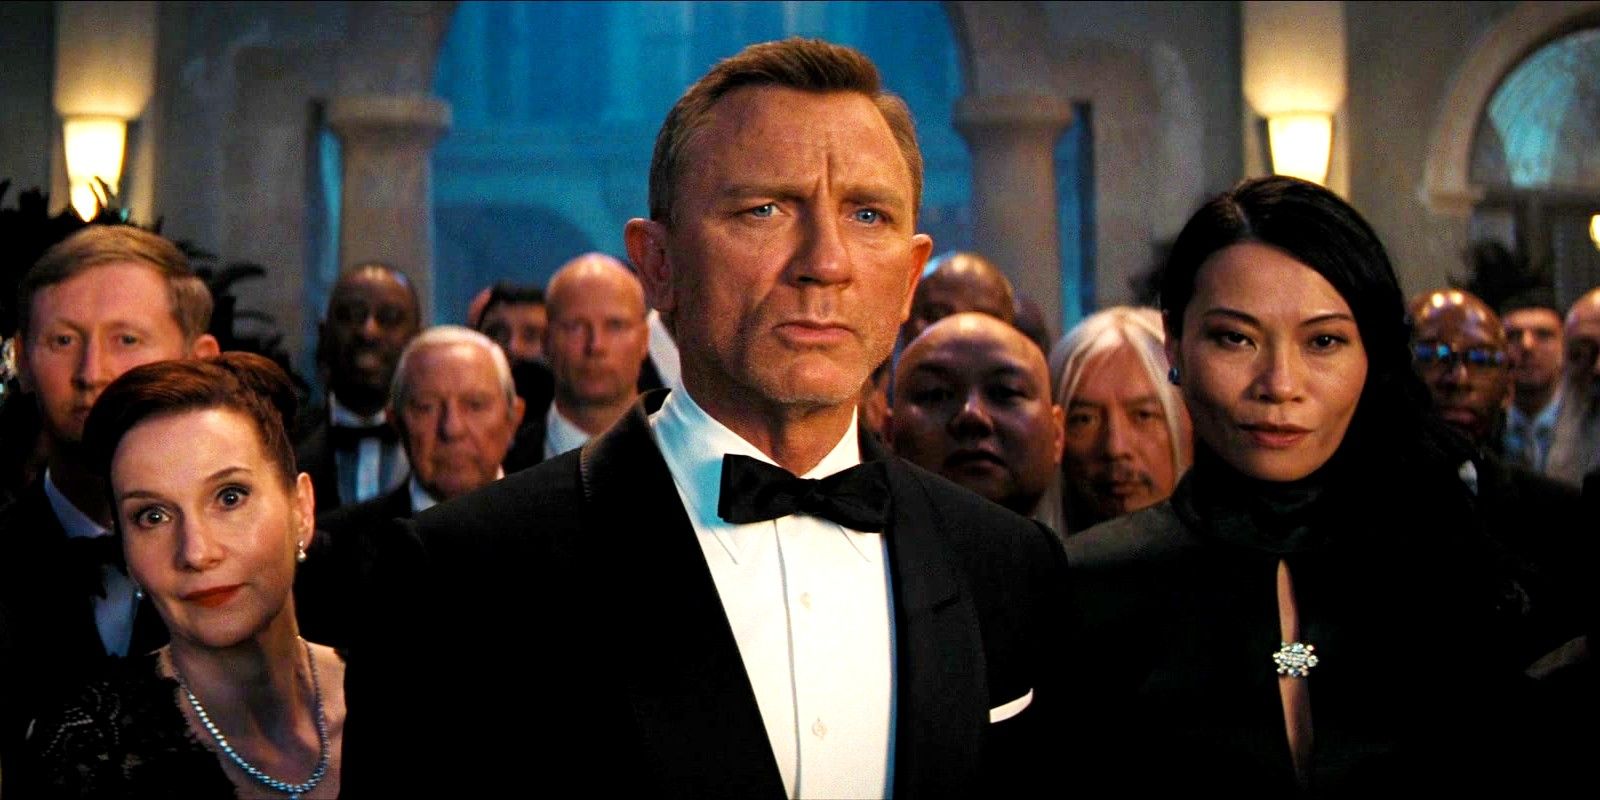 Daniel Craig as James Bond at a party in No Time to Die